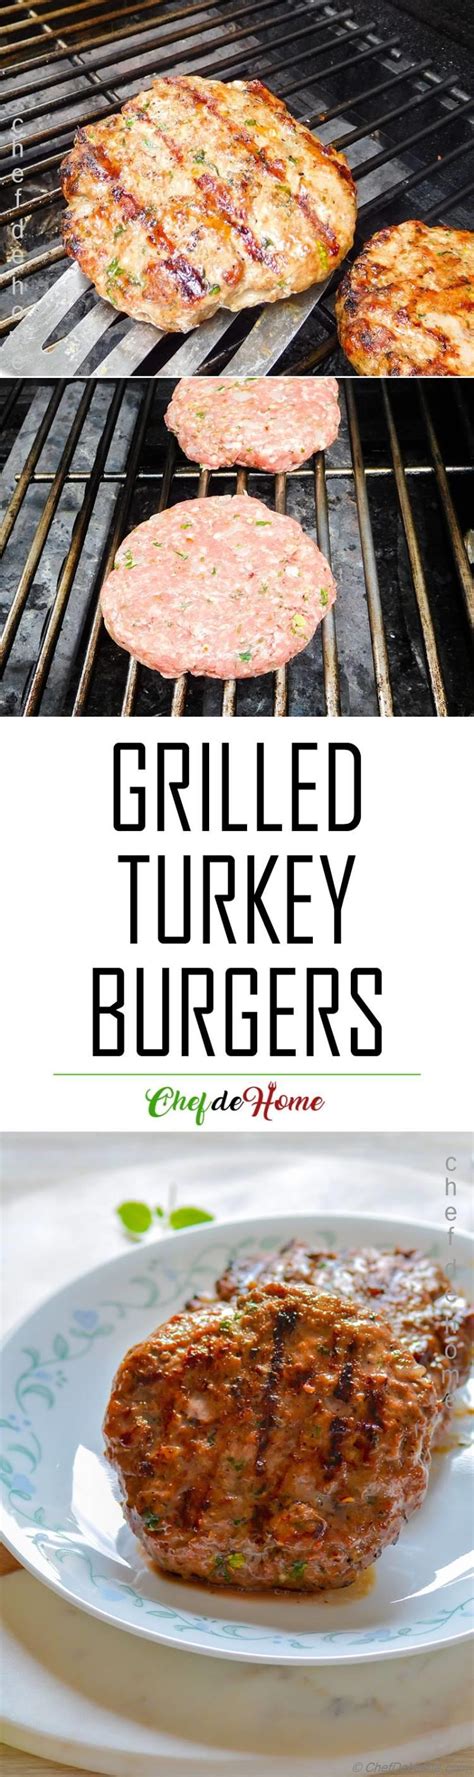 How To Make Grilled Turkey Burger Recipe